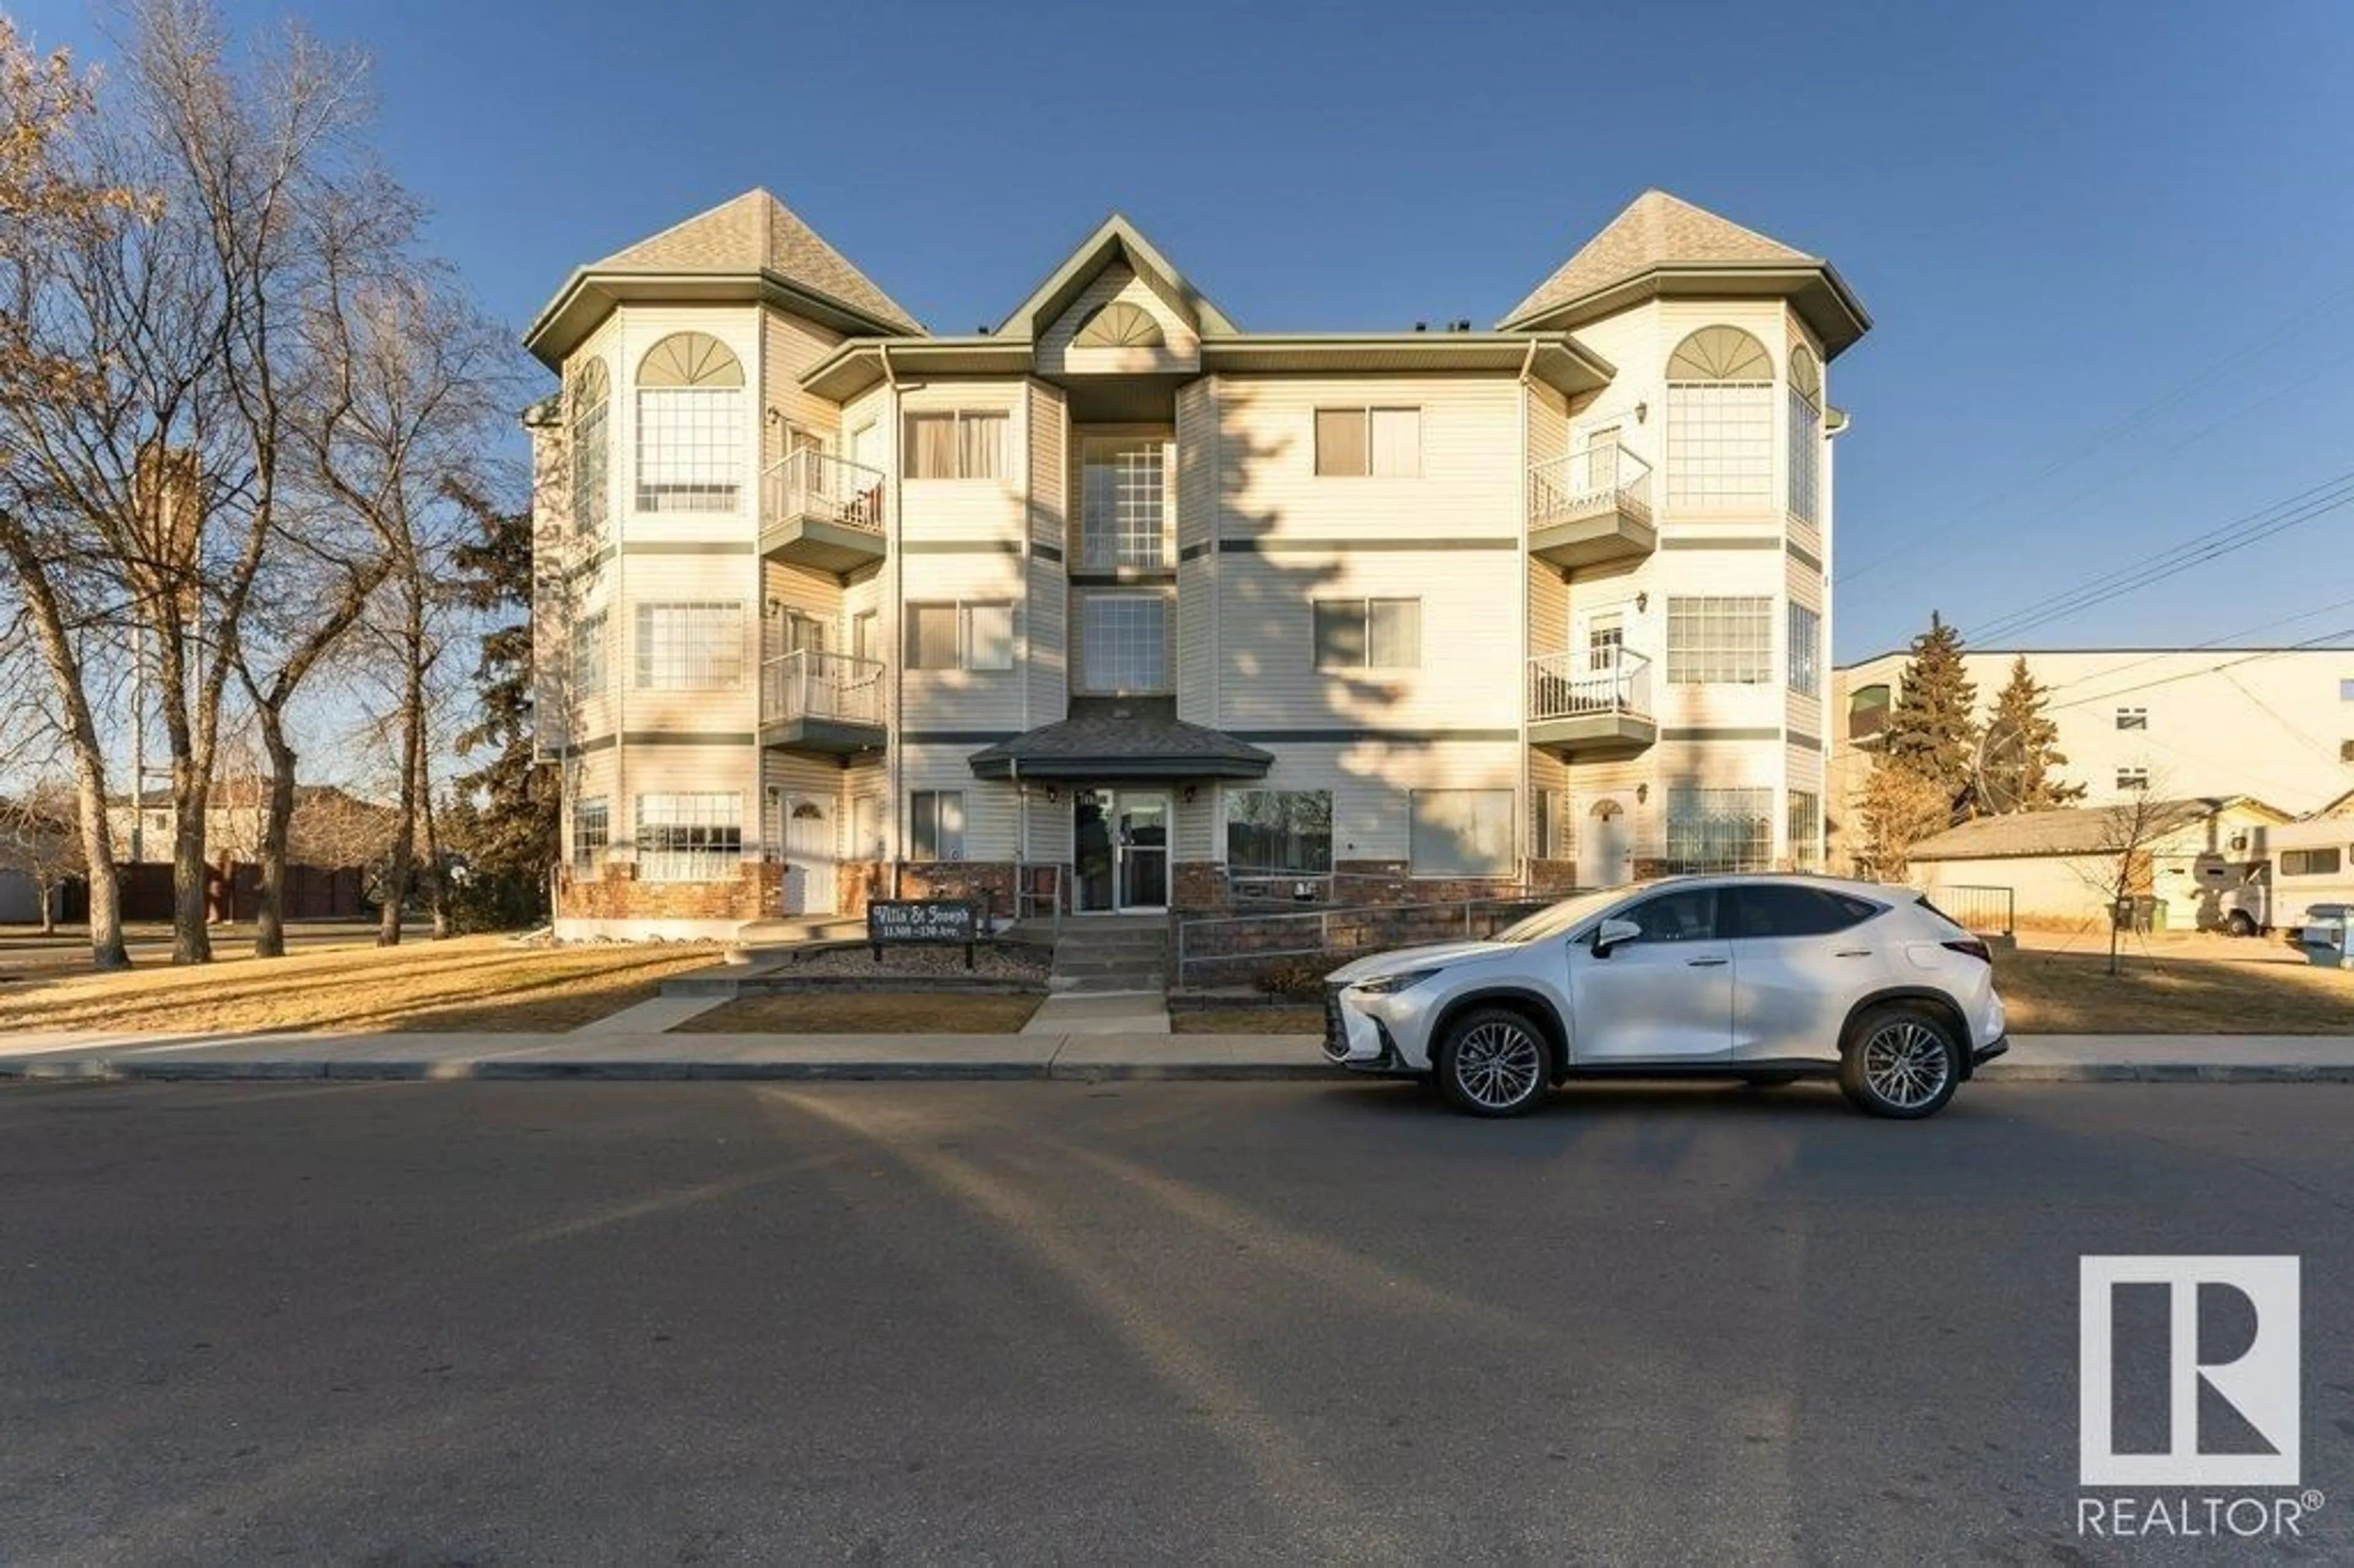 A pic from exterior of the house or condo for #205 11308 130 AV NW, Edmonton Alberta T5E6L2